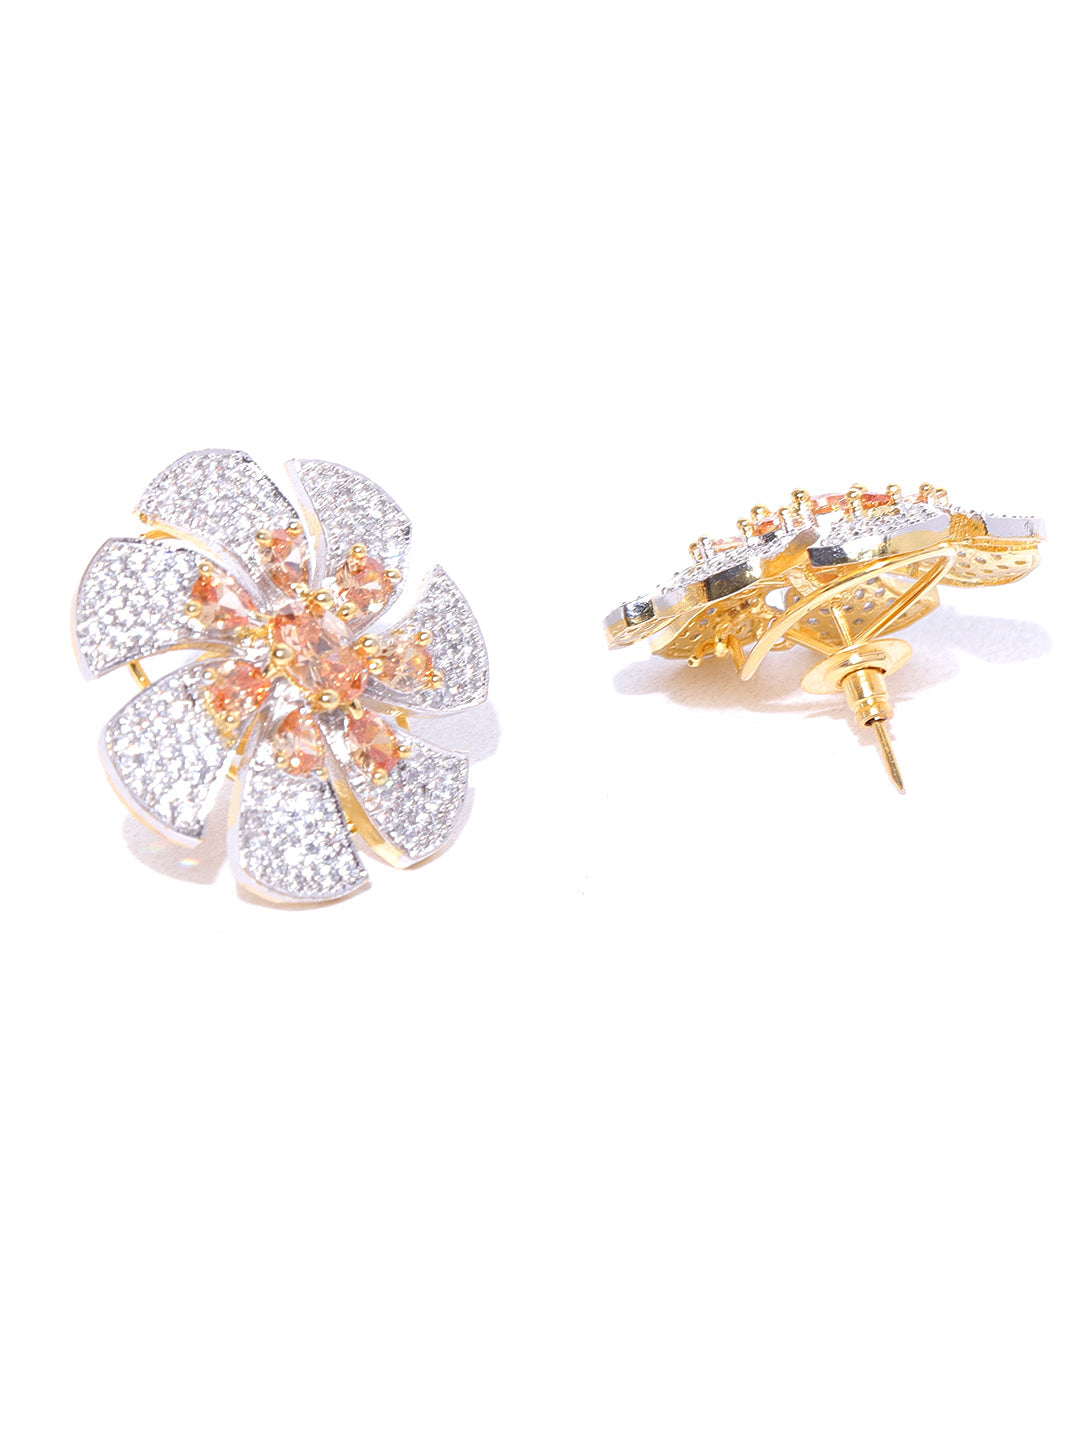 Sparkling Floral Shaped Two Tone American Diamond Stud Earring For Women And Girls - NOZ2TOZ